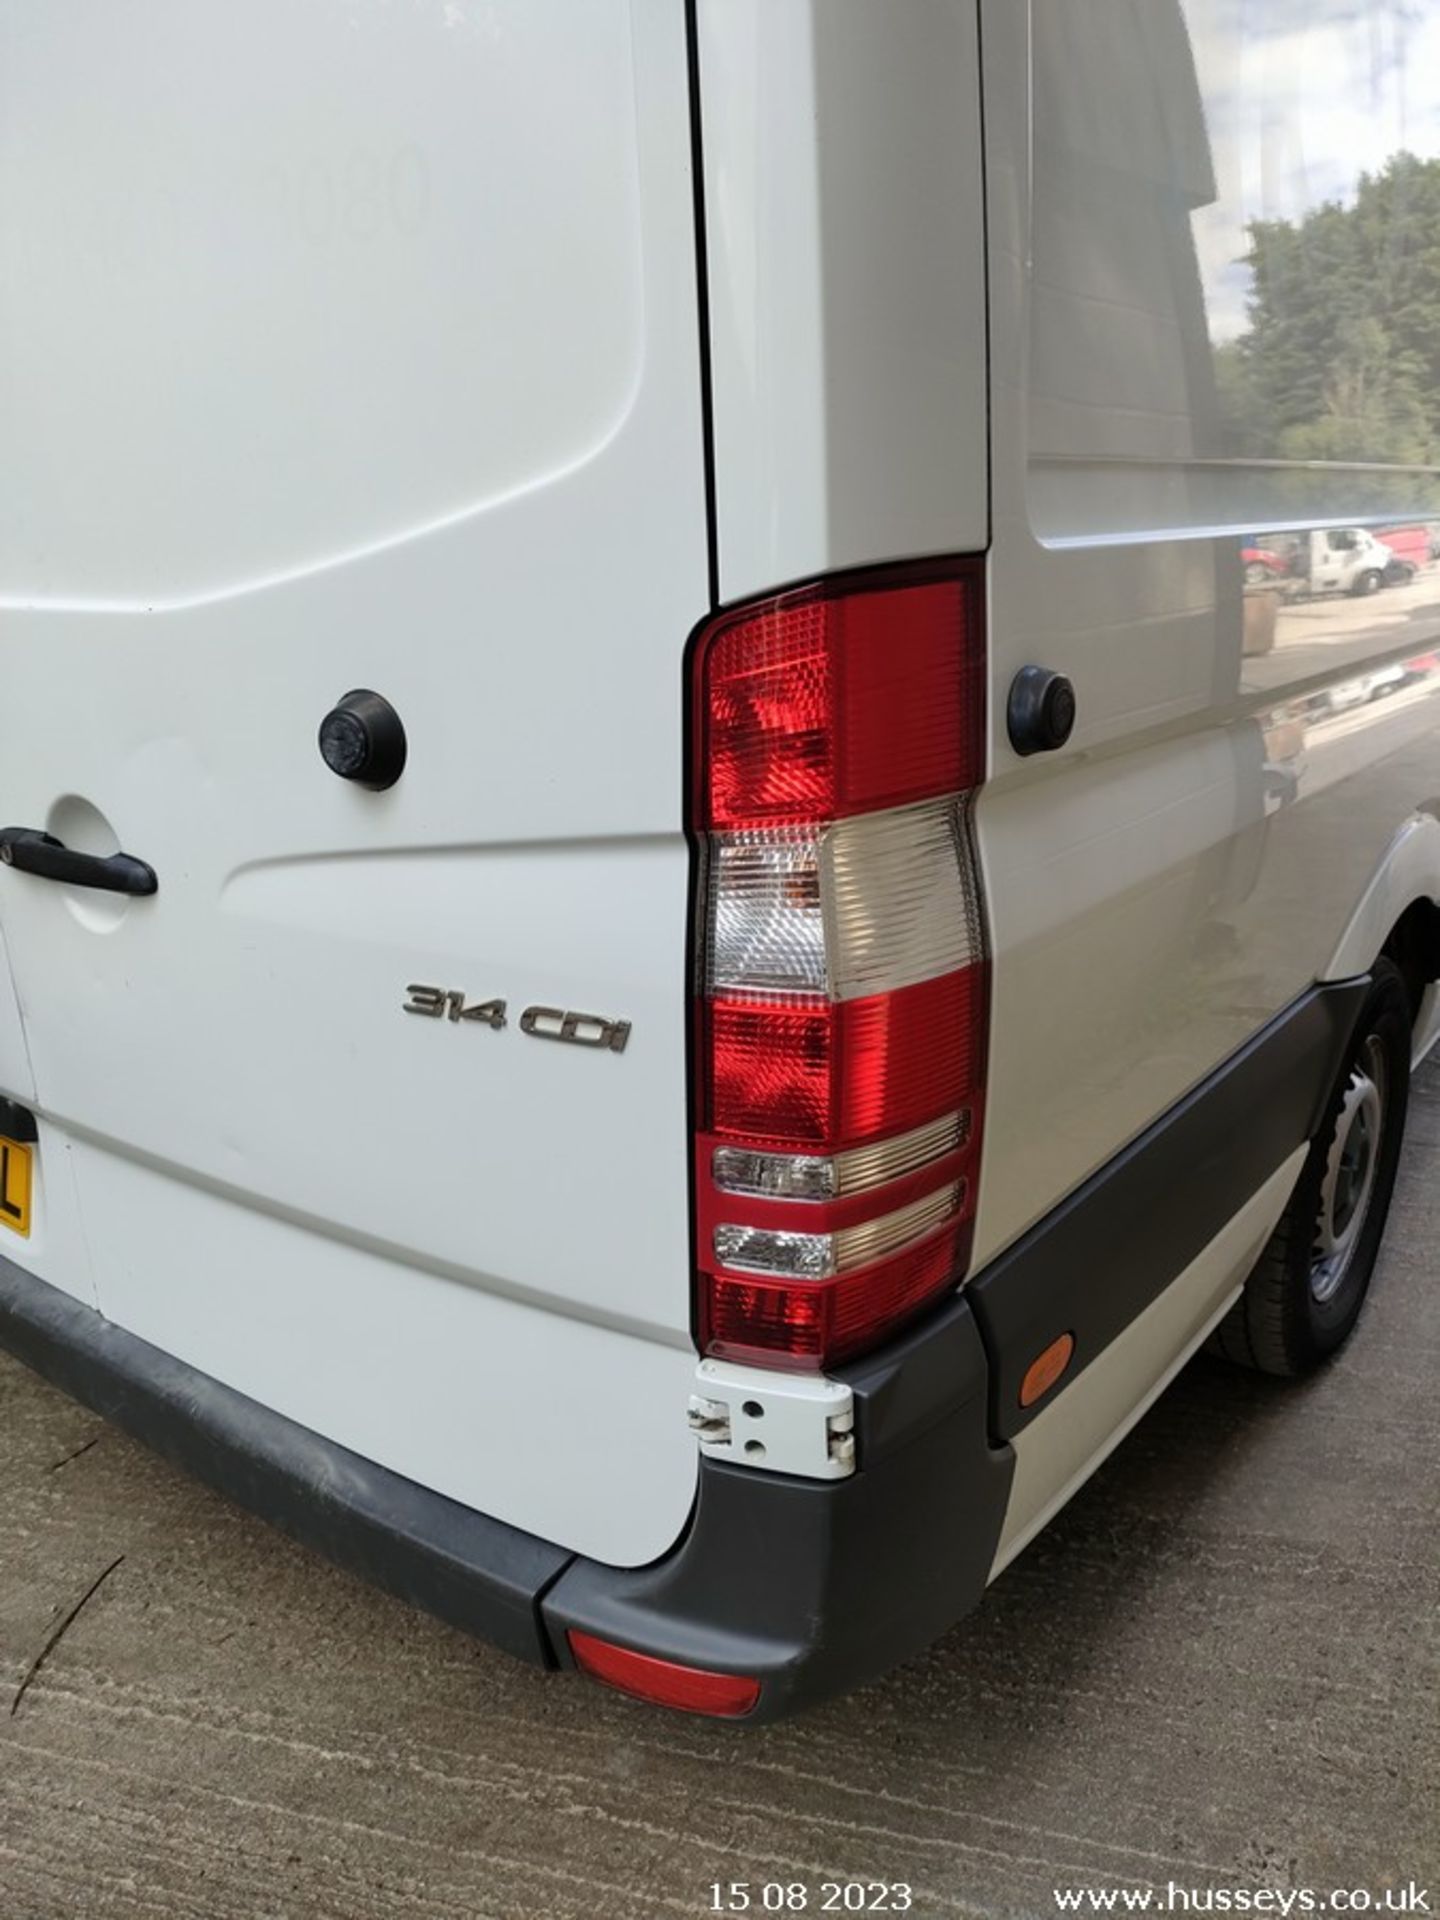 18/68 MERCEDES-BENZ SPRINTER 314CDI - 2143cc 5dr Refrigerated (White) - Image 35 of 40